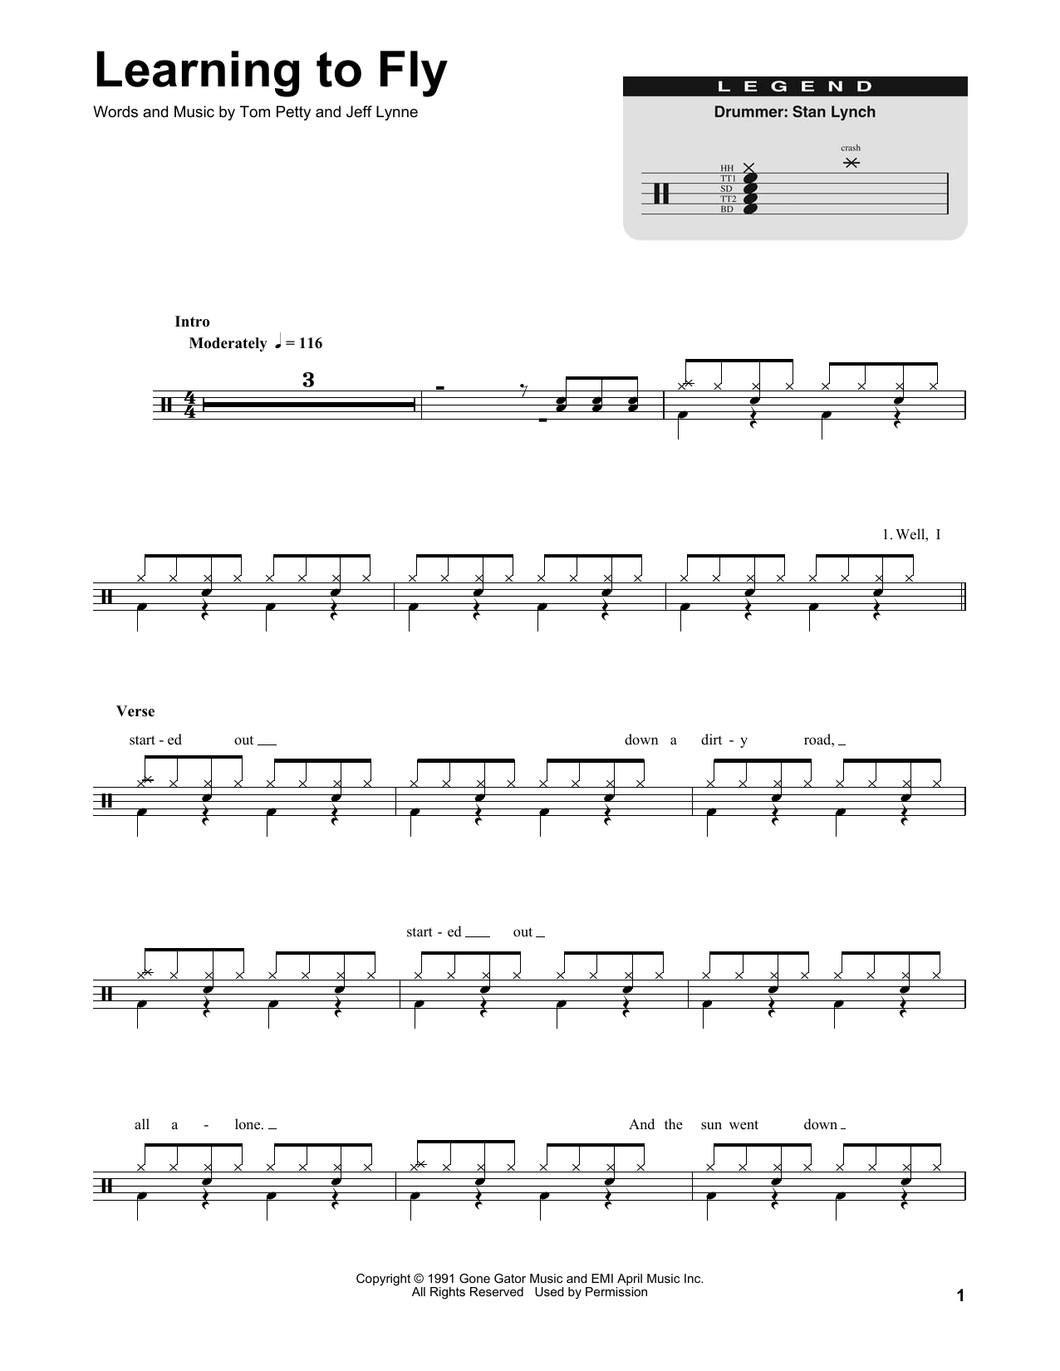 Learning to Fly - Tom Petty - Full Drum Transcription / Drum Sheet Music - SheetMusicDirect DT